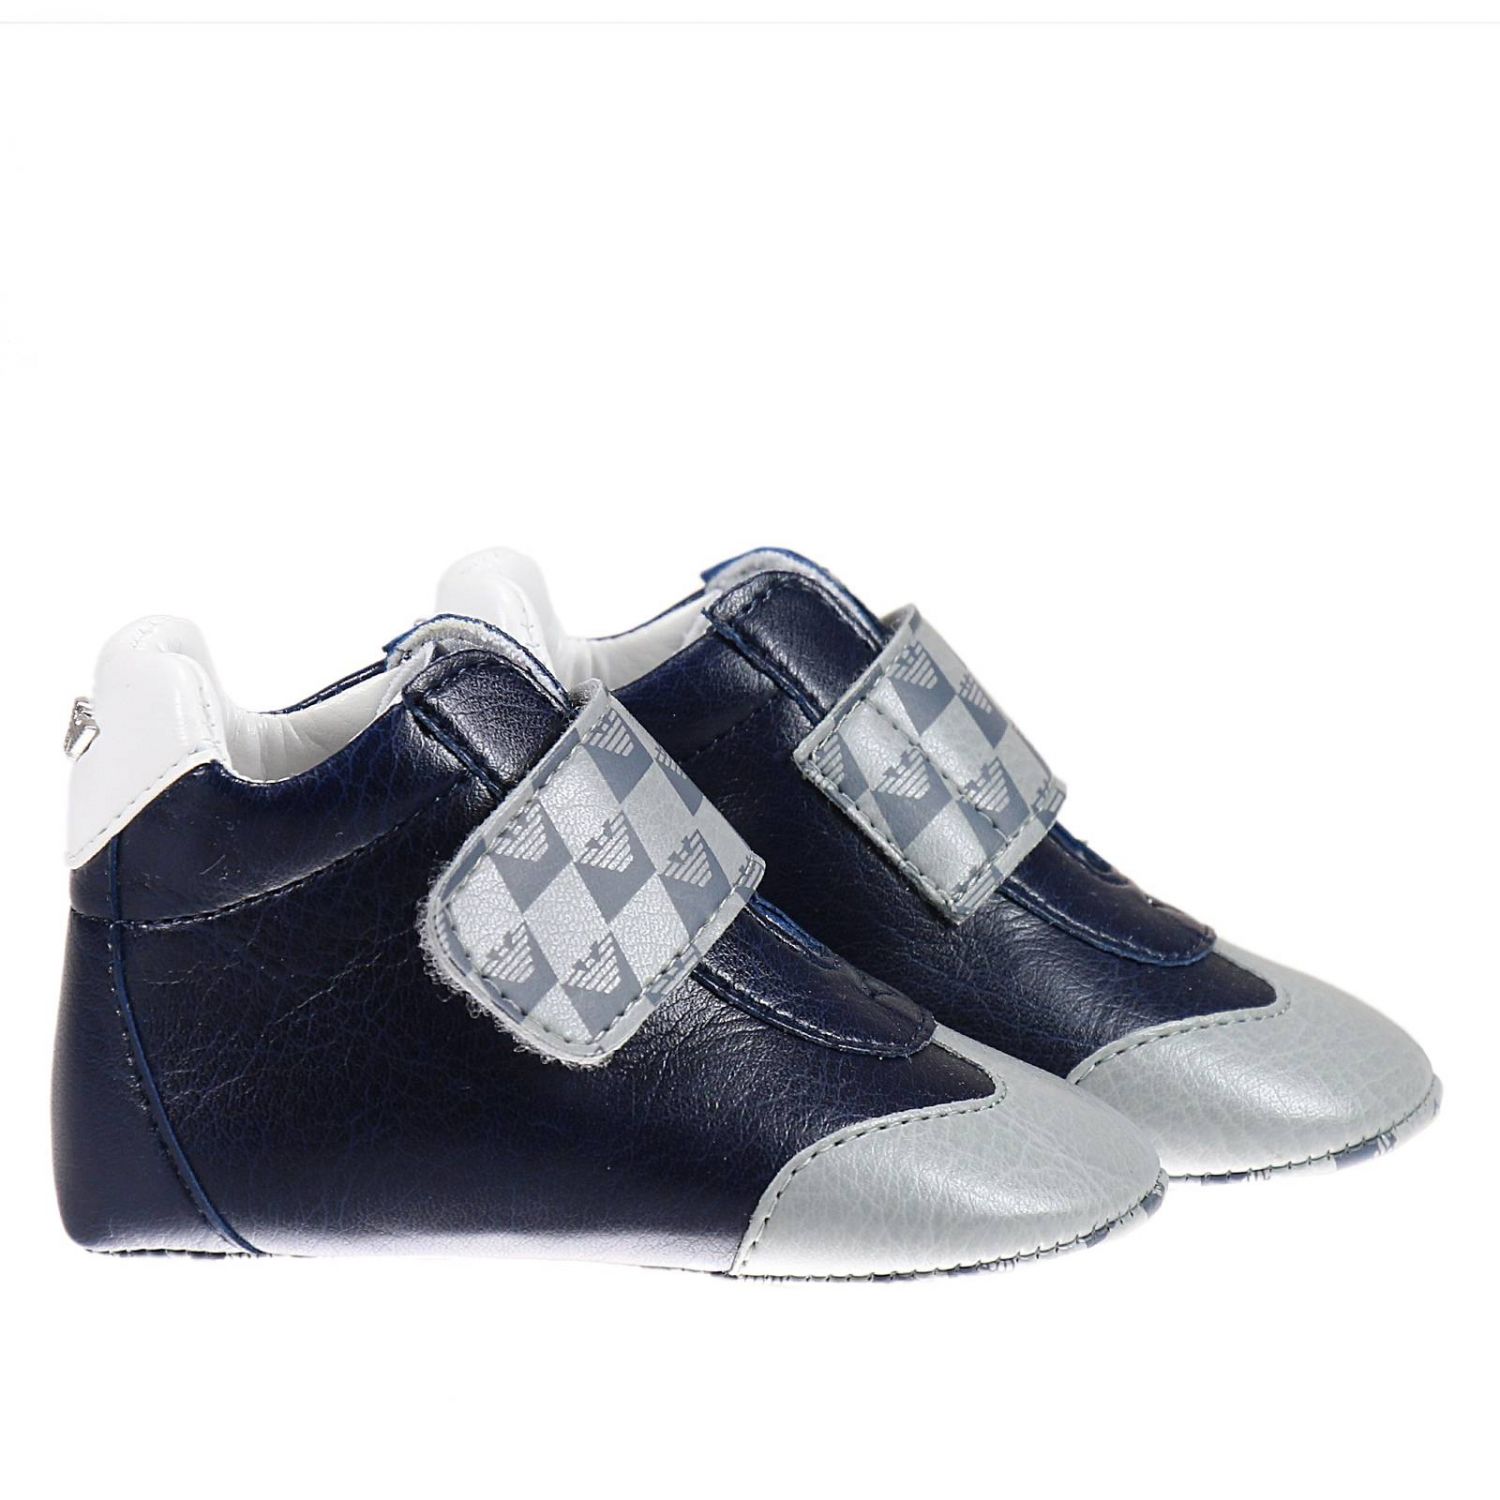 Shoes Armani Baby 405003 6A003 Giglio EN